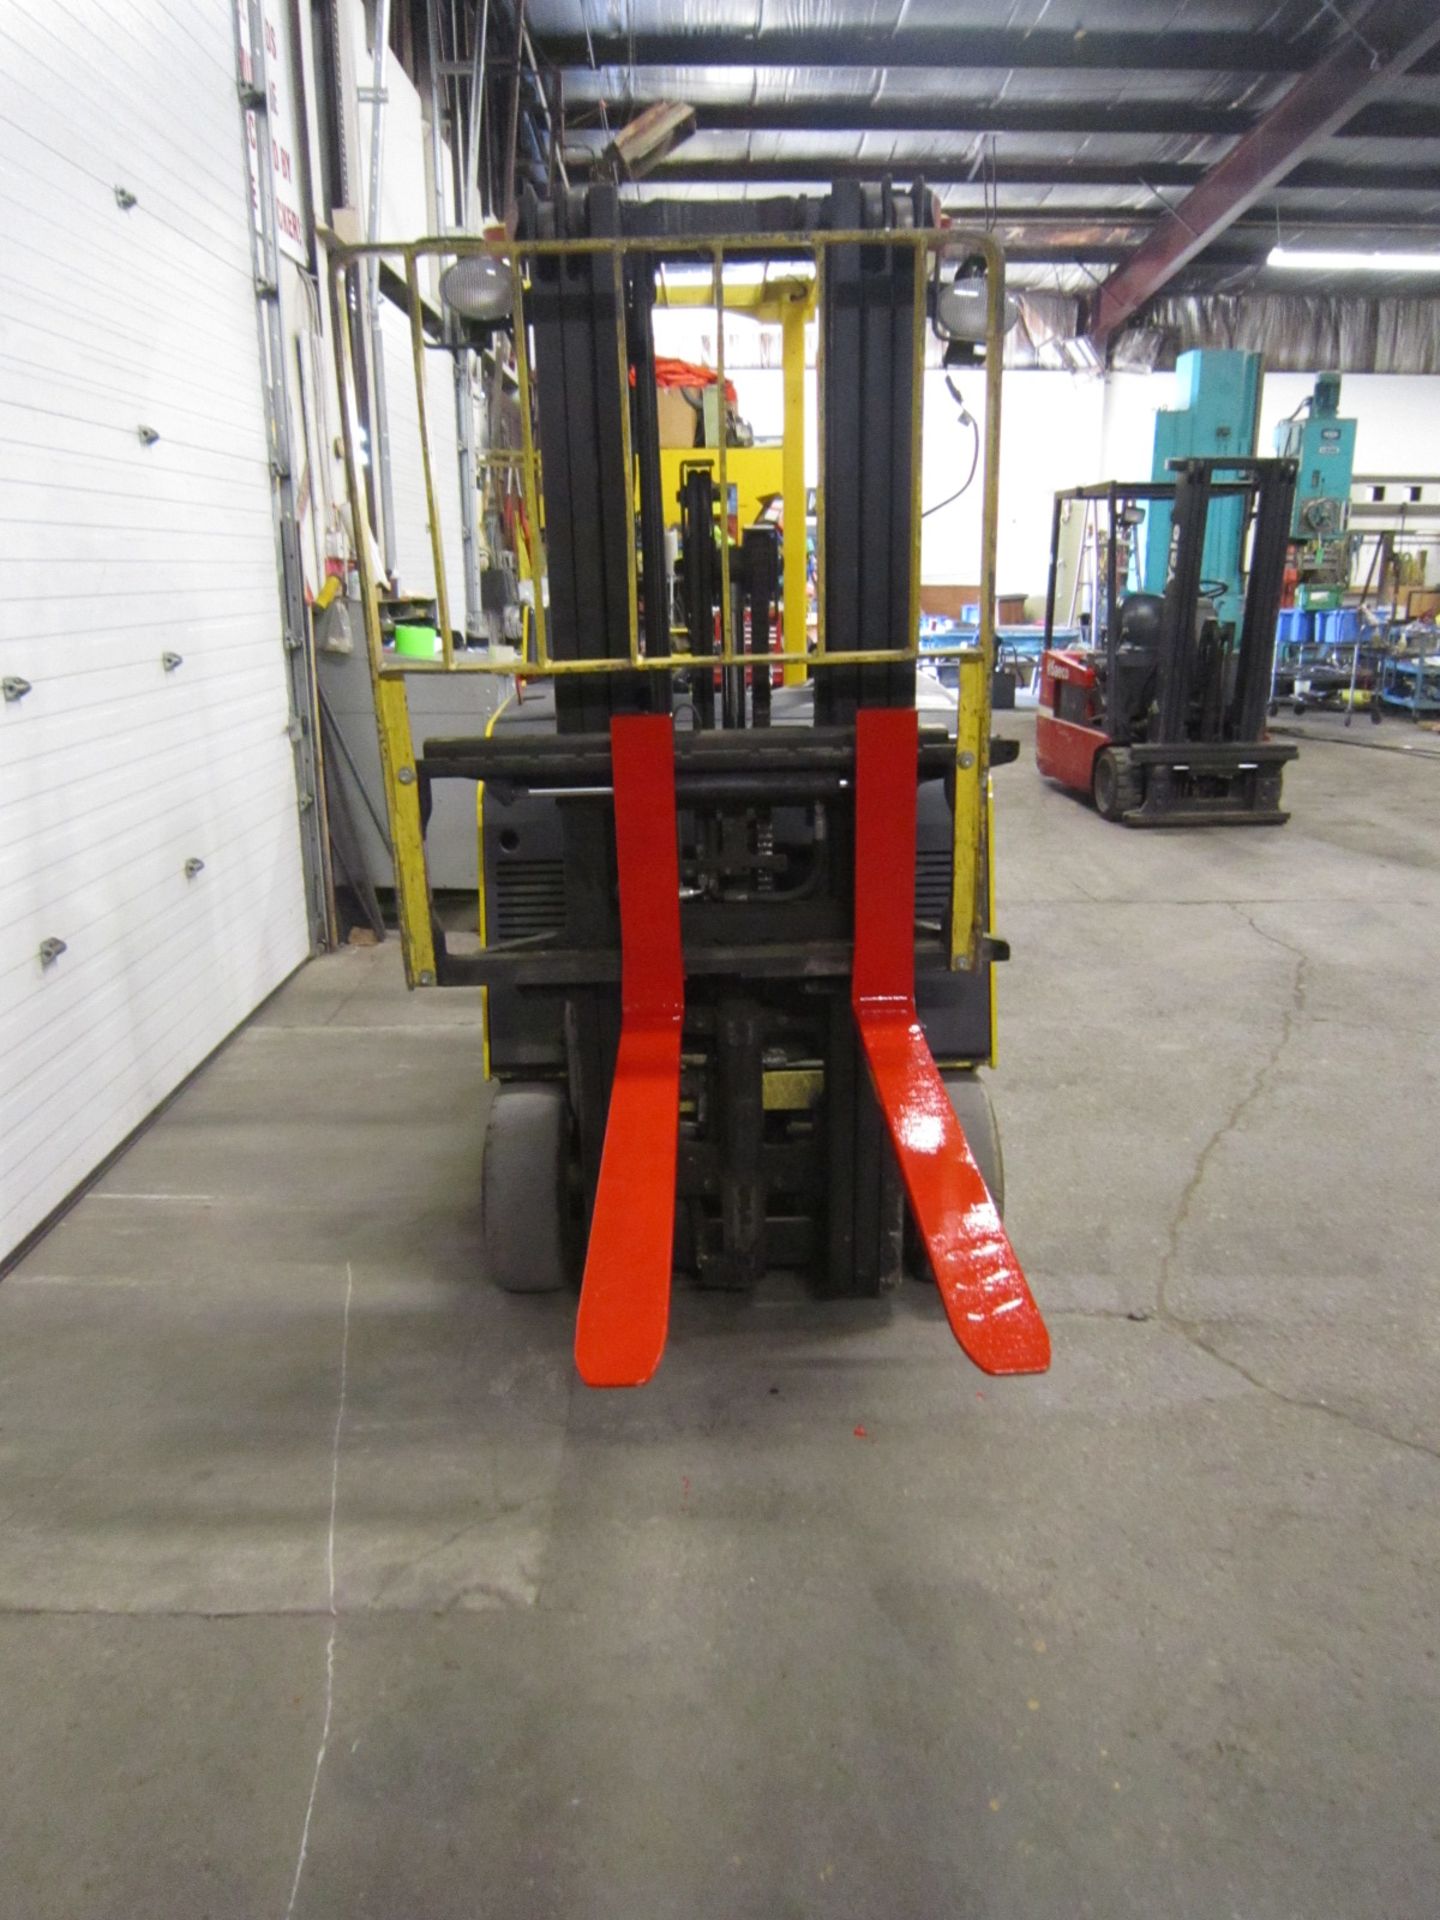 2003 Hyster model E30HSD 3000lbs Capacity Electric Rideon Lift Truck Stand-On Forklift with 3- - Image 3 of 3